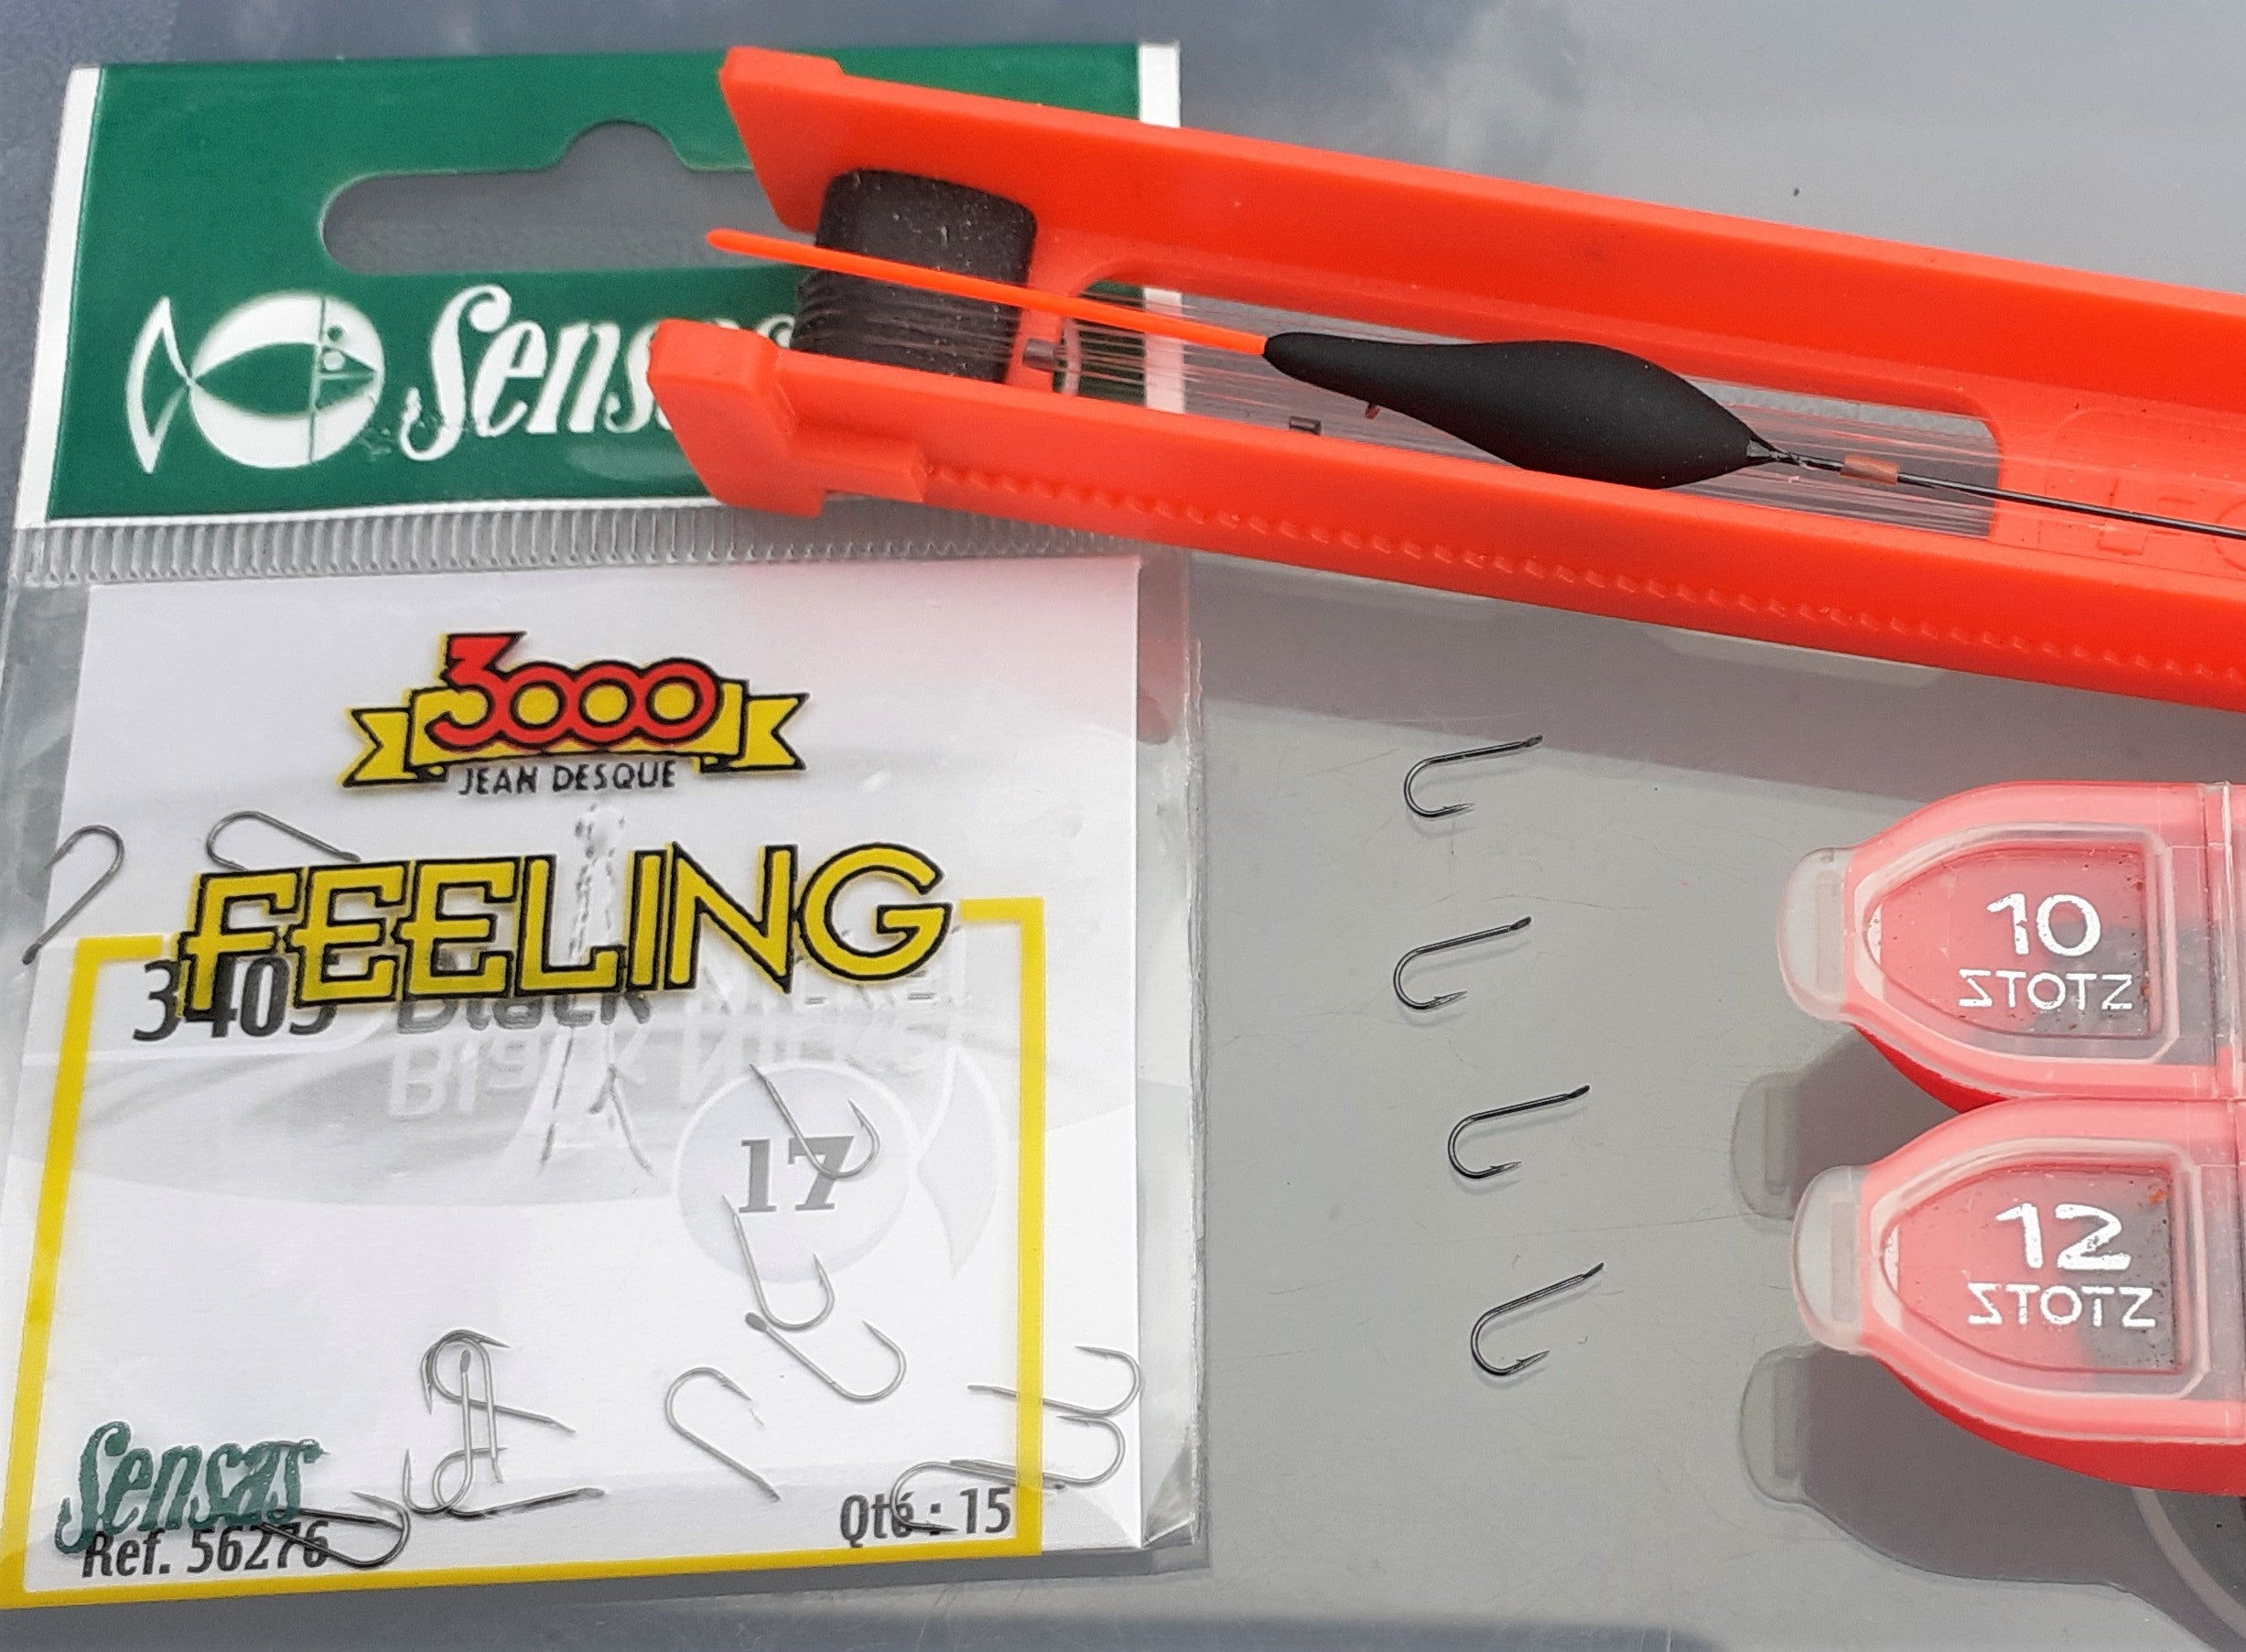 Drennan Super Specialist Fishing Hooks – The Tackle Lounge